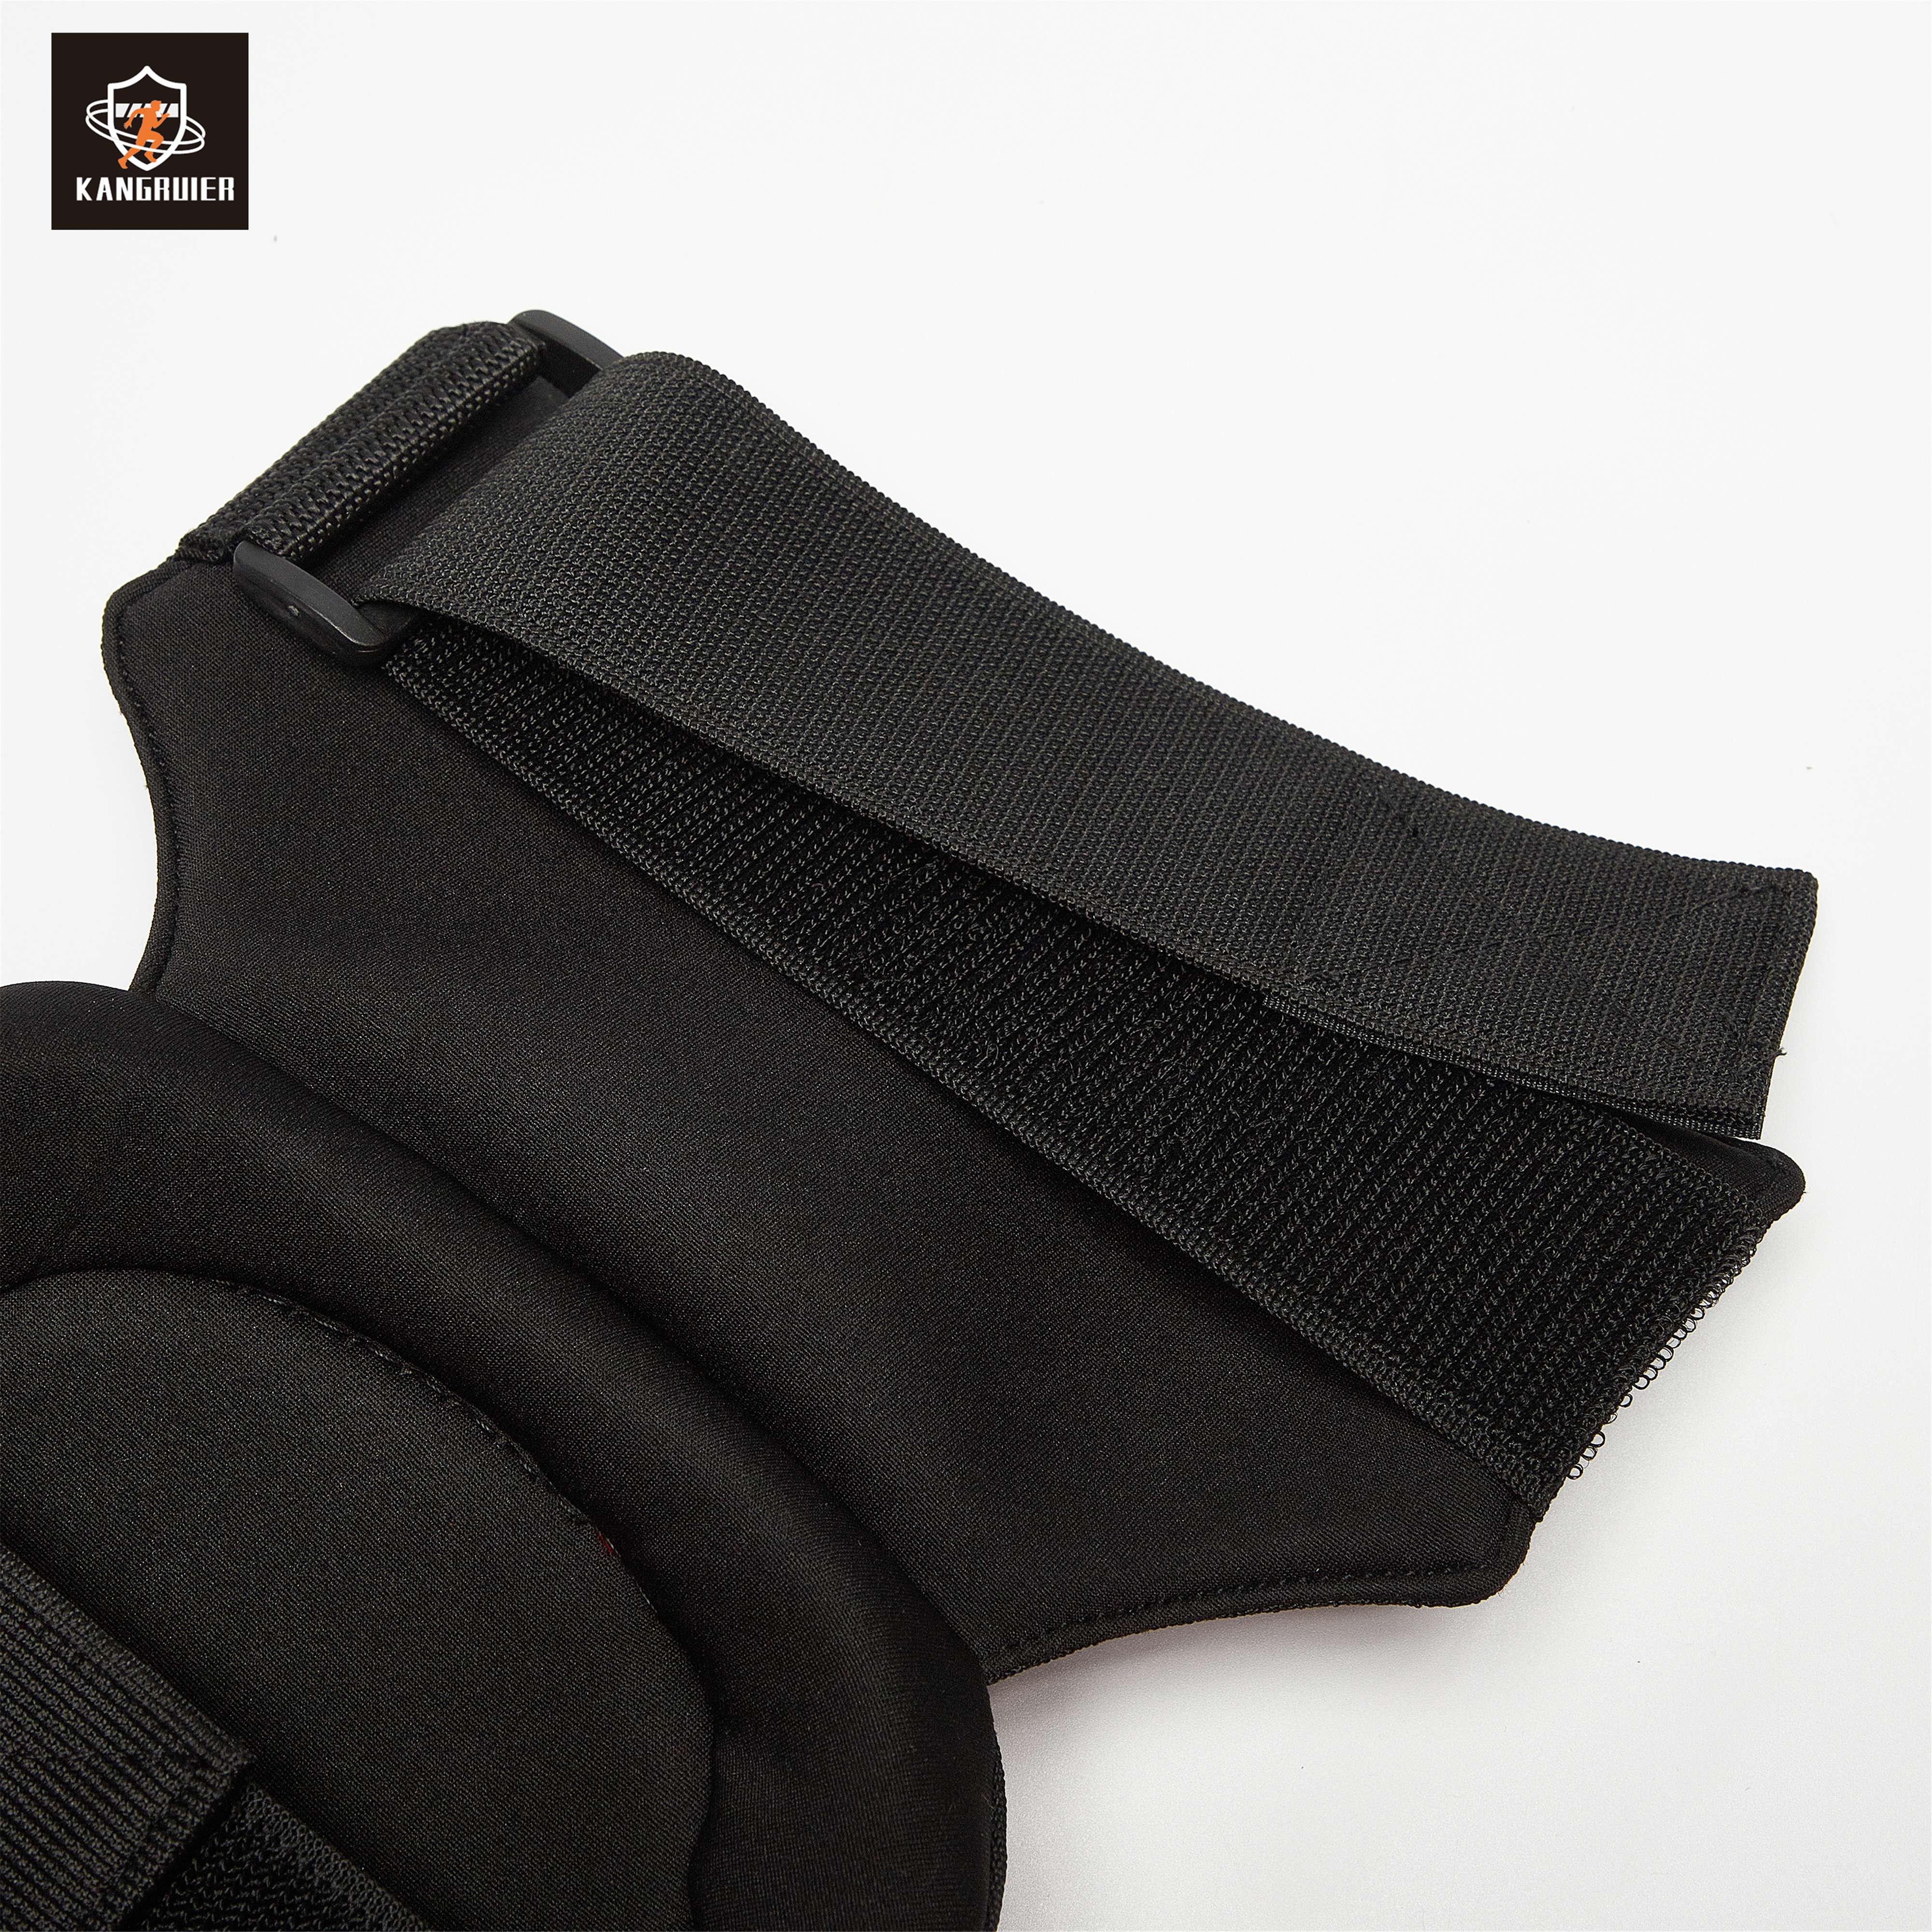 Knee Pads for Work, Gardening, Cleaning,Construction, Flooring, Thick Foam Cushion